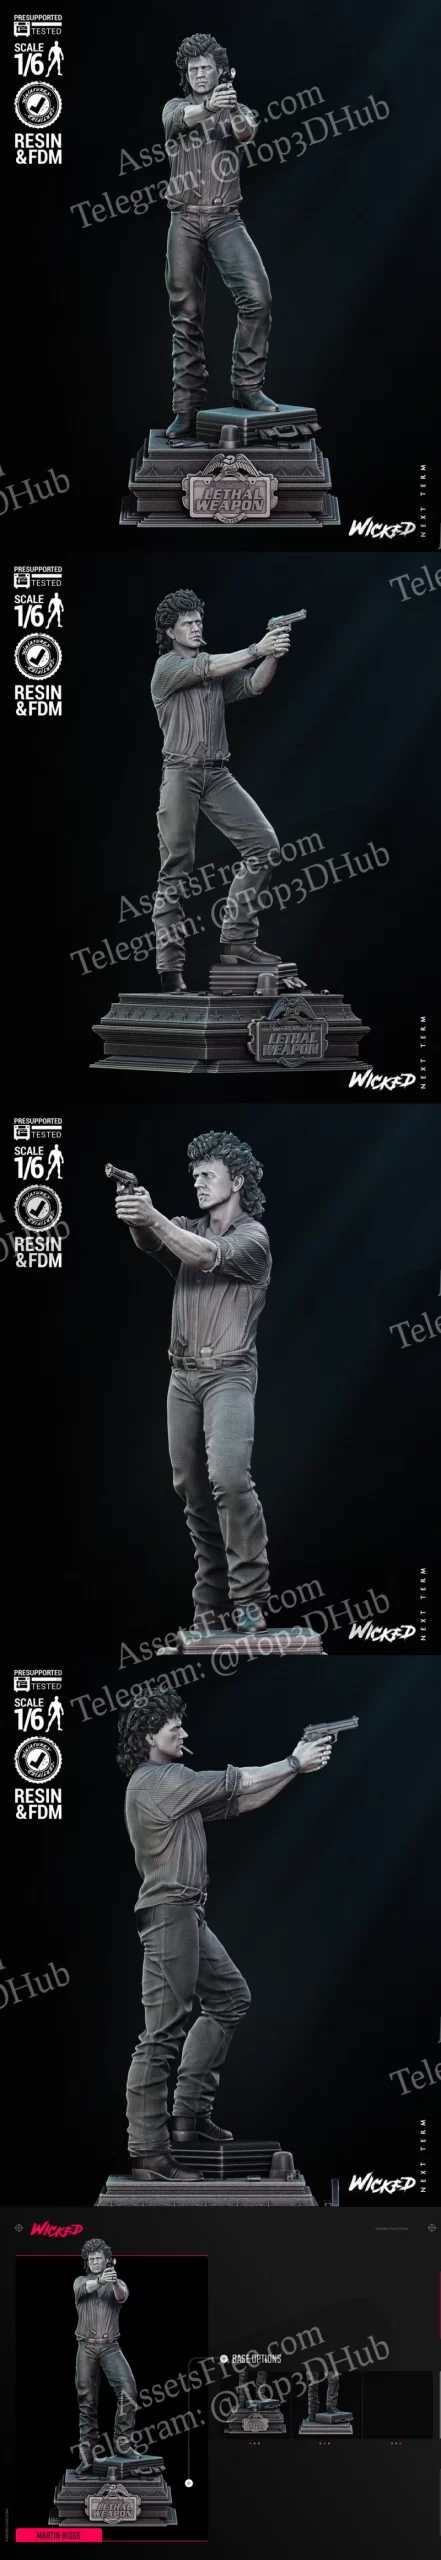 Riggs Sculpture - Lethal Weapon